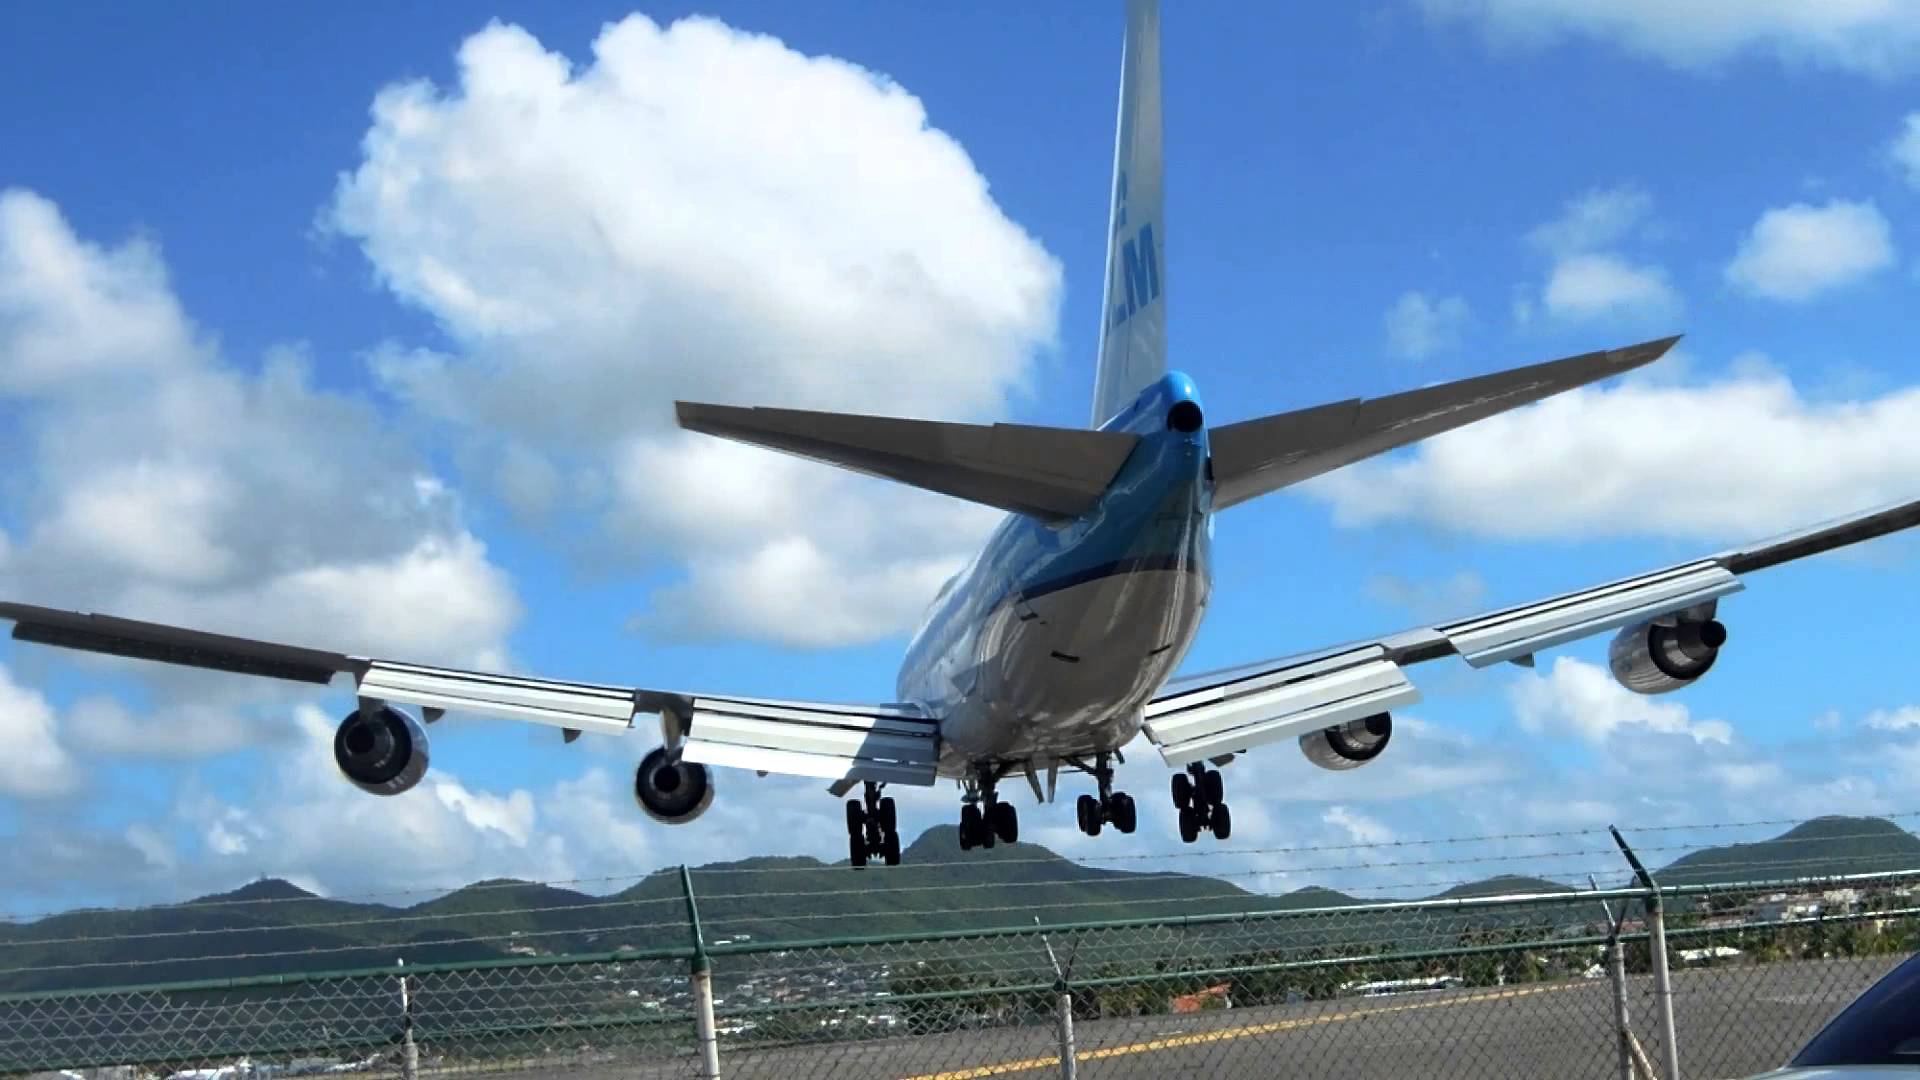 Airplane flying over beach to Airport, St. Maarten. MUST SEE ...